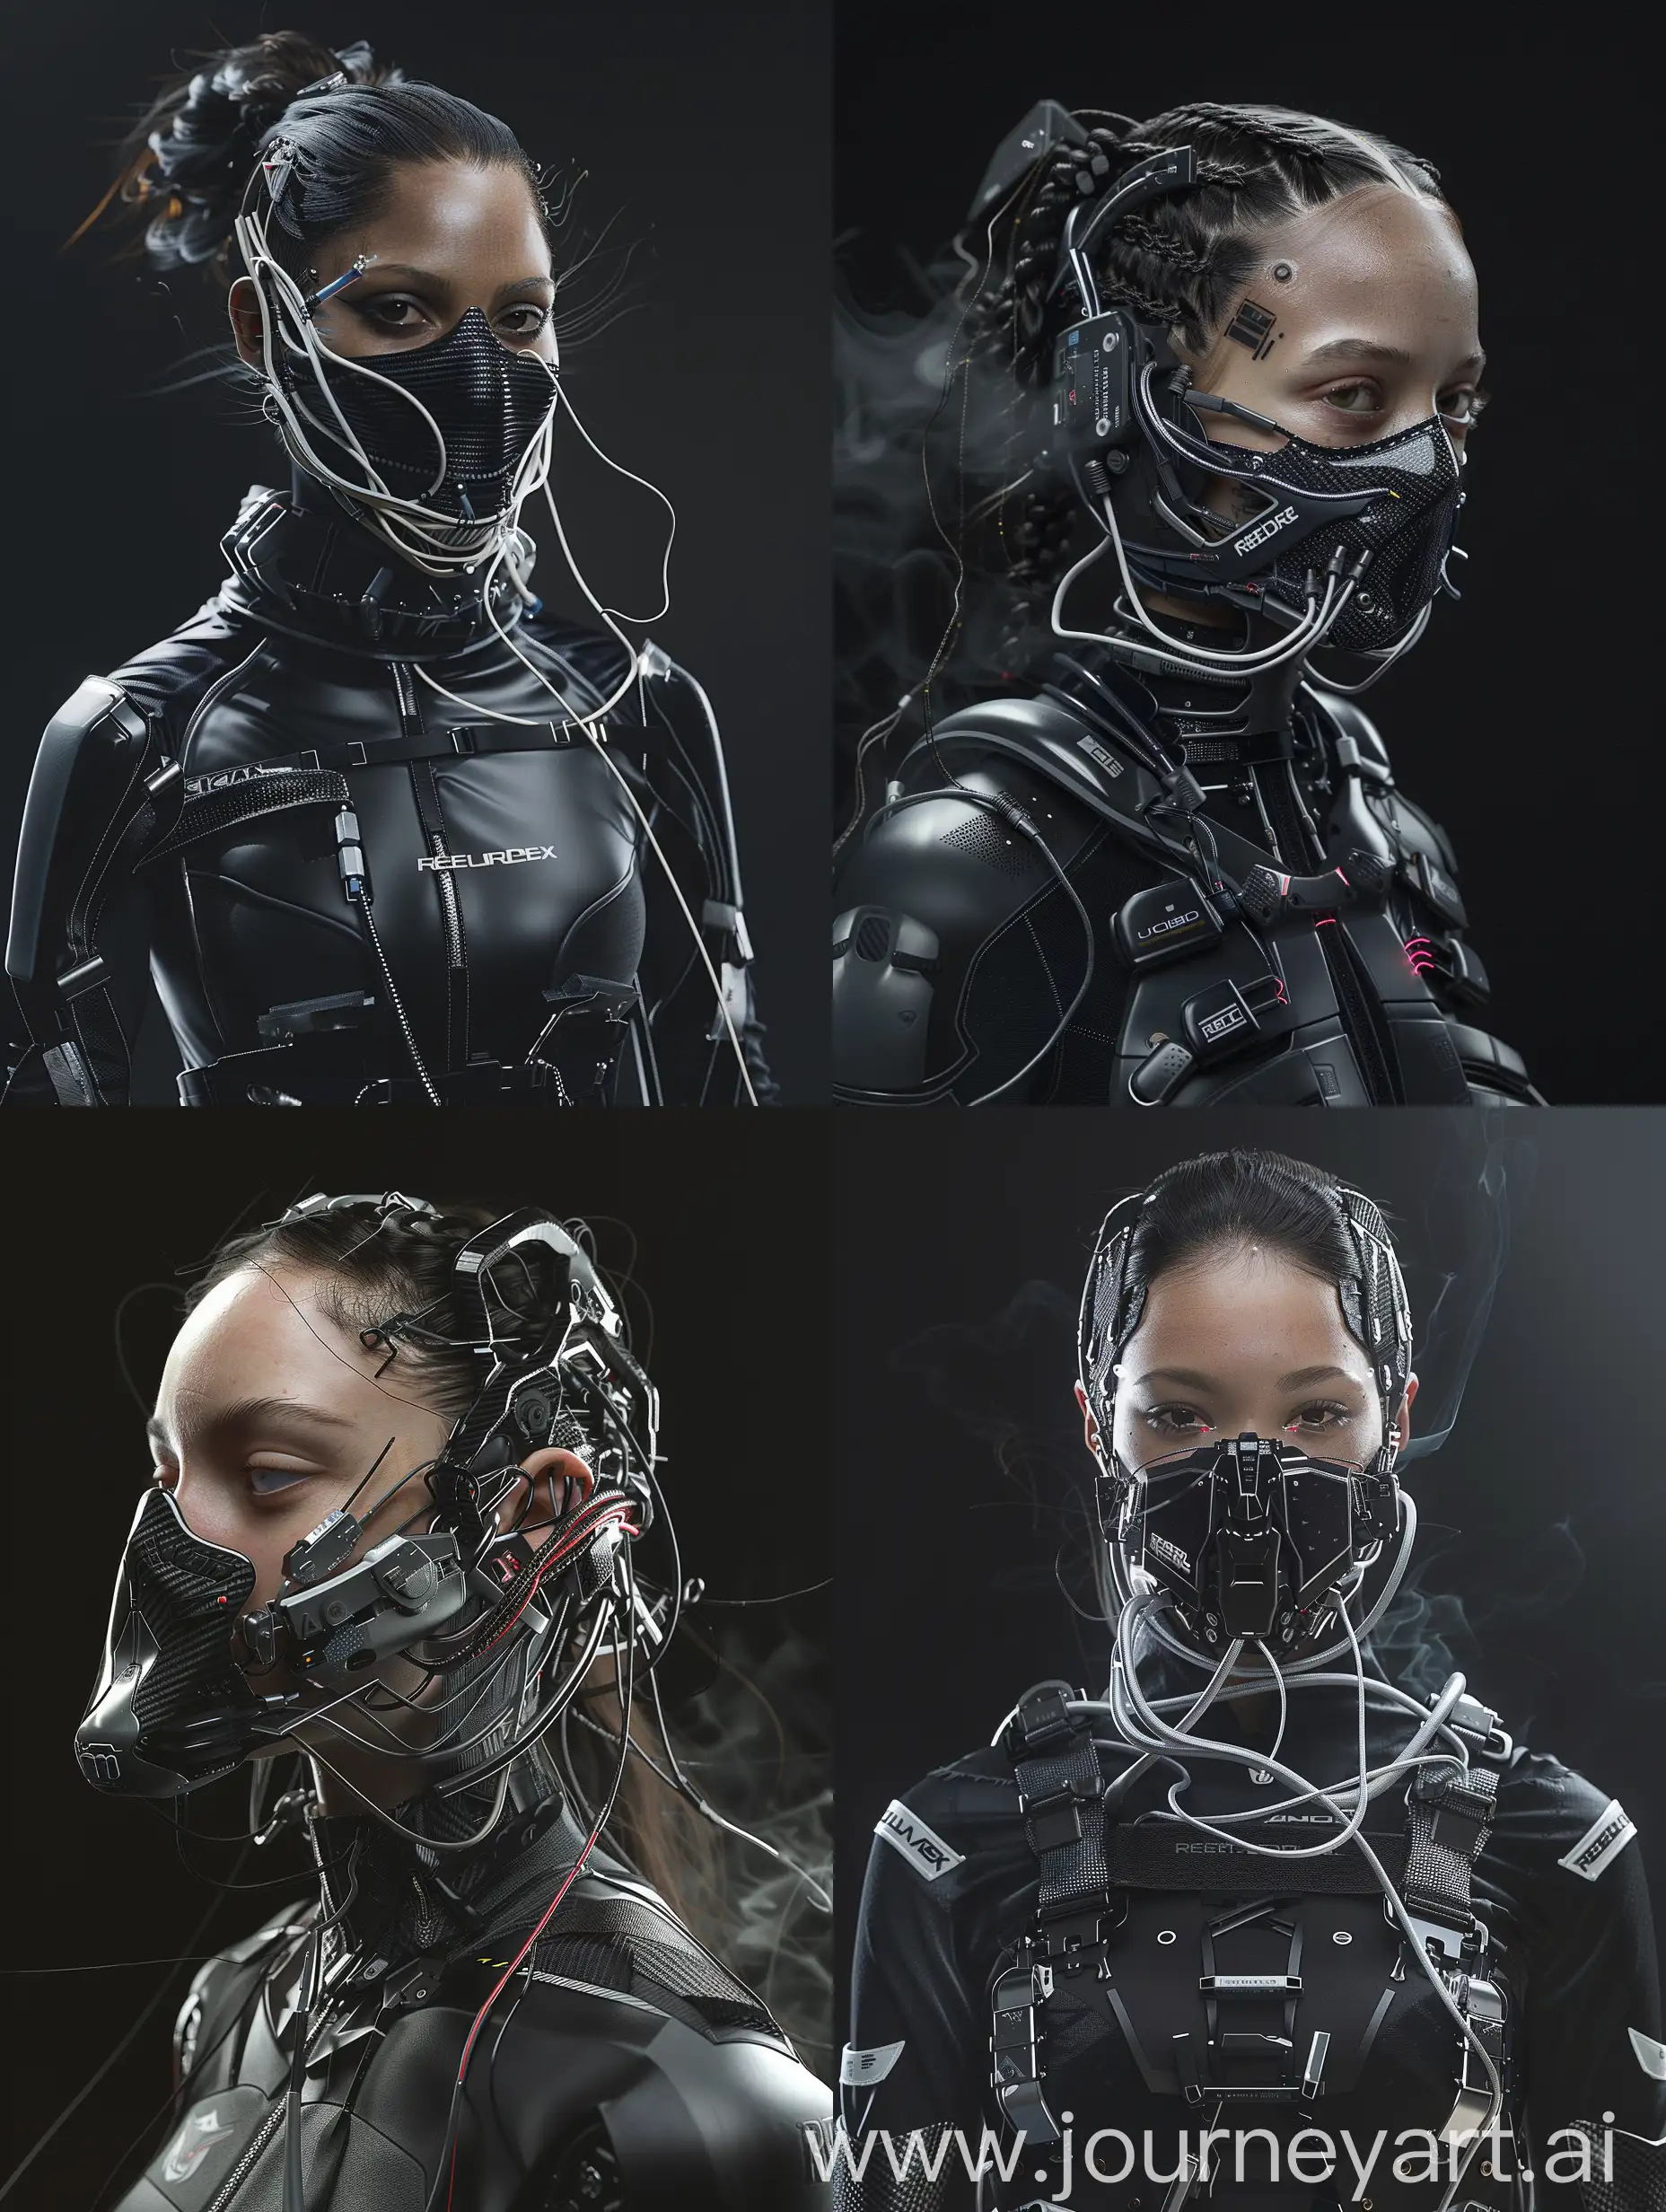 Against a sleek black backdrop, witness the captivating presence of a Beautiful characther adorned with a cybernetic mouth-covering mask. It seamlessly merges cutting-edge technology with intricate details, showcasing carbon fiber textures, sleek aluminum accents, and pulsating wires. Symbolizing the delicate equilibrium between humanity and machine, her appearance embodies the essence of a futuristic cyberpunk aesthetic, further accentuated by Reebok-inspired add-ons. With dynamic movements reminiscent of action-packed film sequences, accompanied by cinematic haze and an electric energy, she exudes an irresistible allure that commands attention